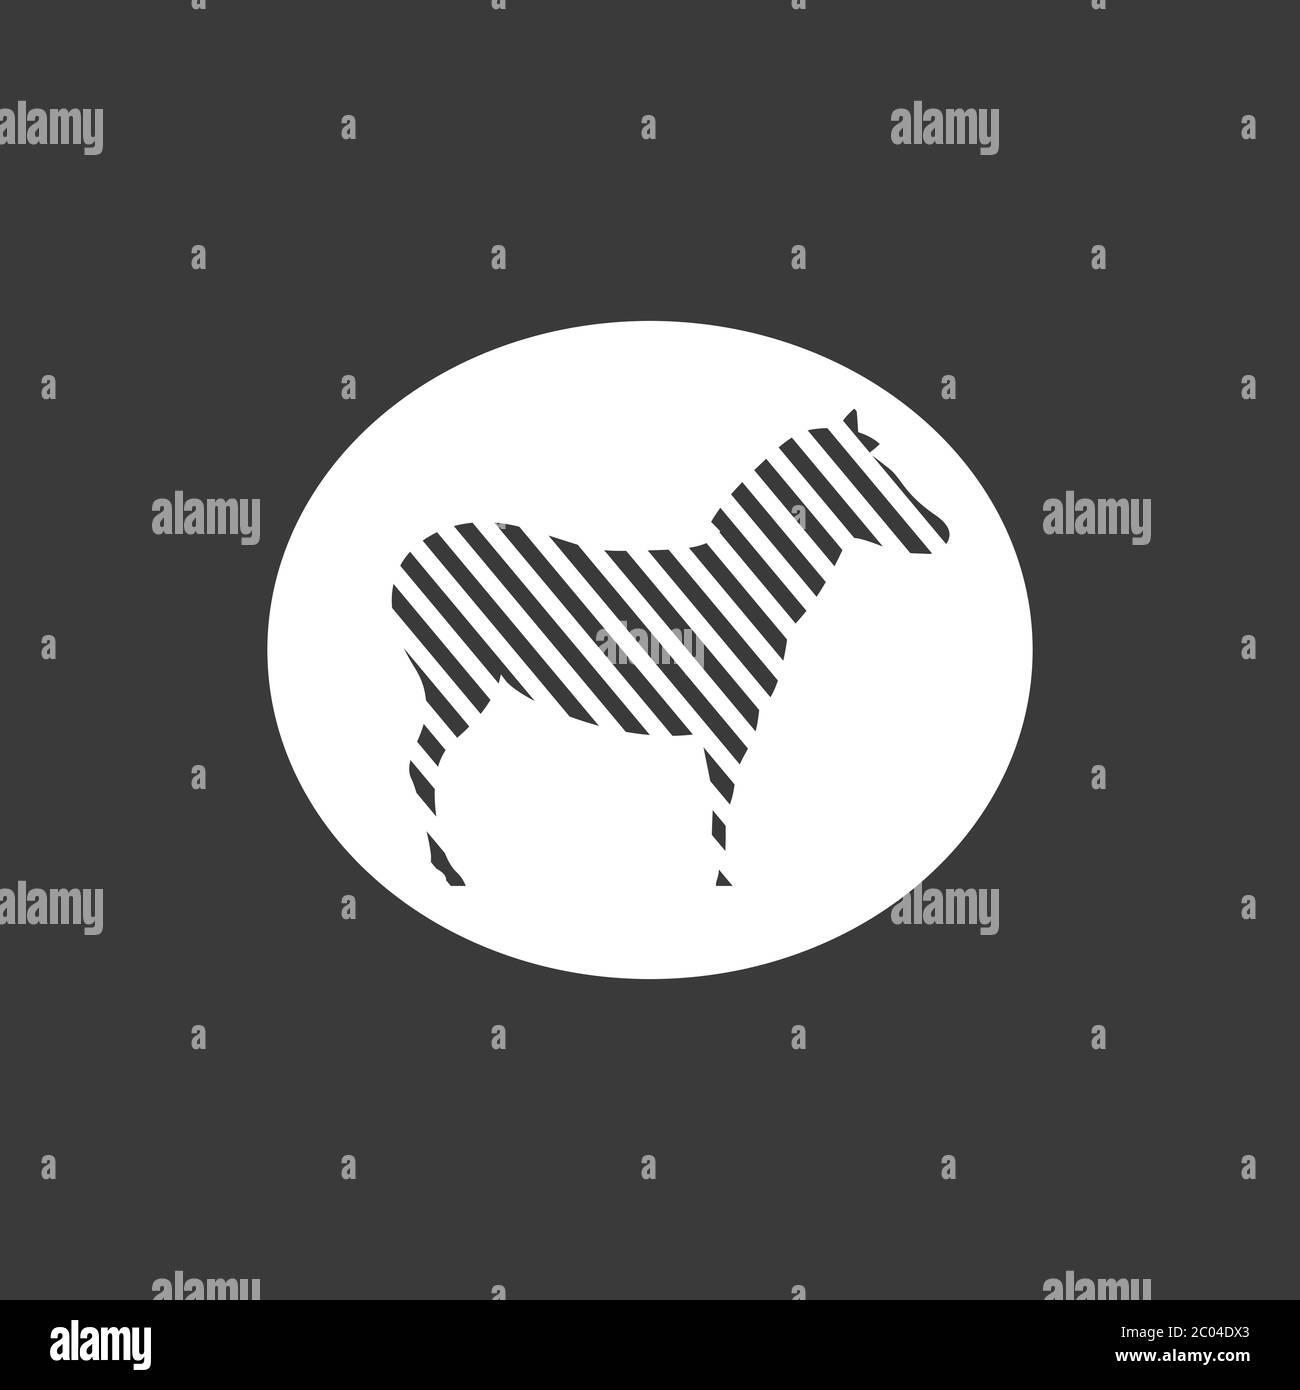 Zebra icon. Abstract zebra pattern icon isolated on background Stock Vector